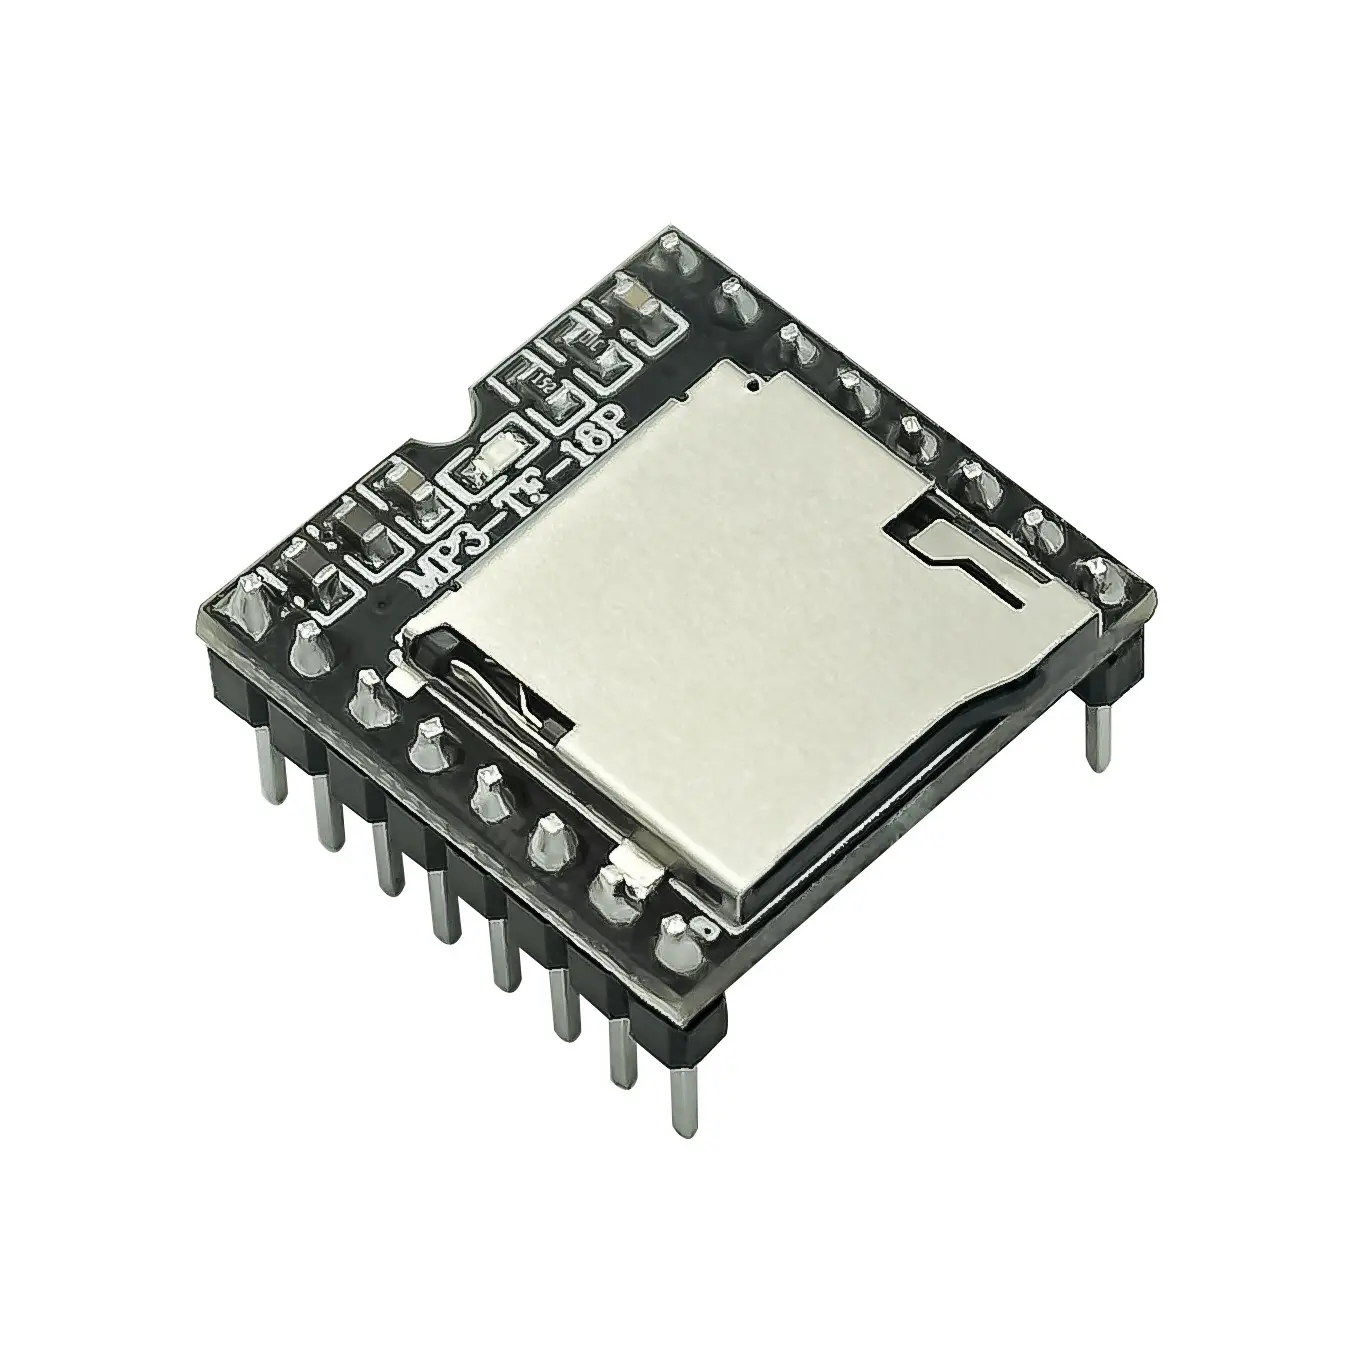 Mini MP3 Player Module with Simplified Output Speaker for Arduino For UNO